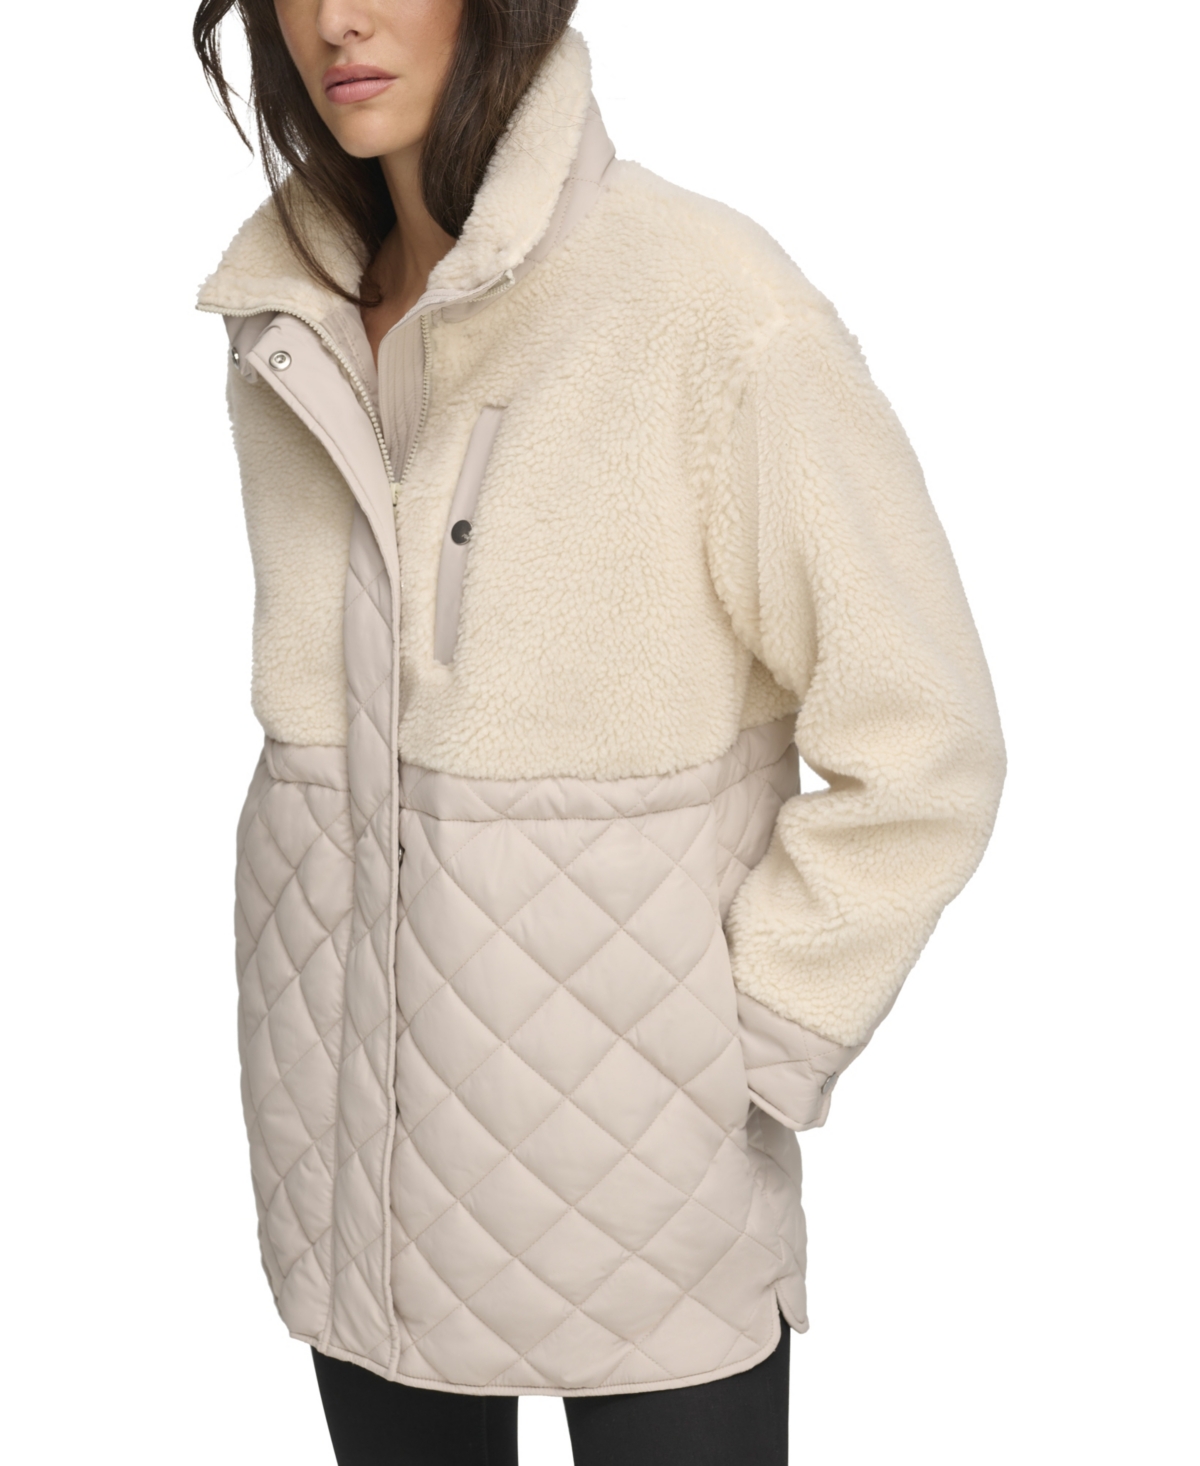 Women's Mixed Media Sherpa and Quilt Jacket With Adjustable Waist - Twine